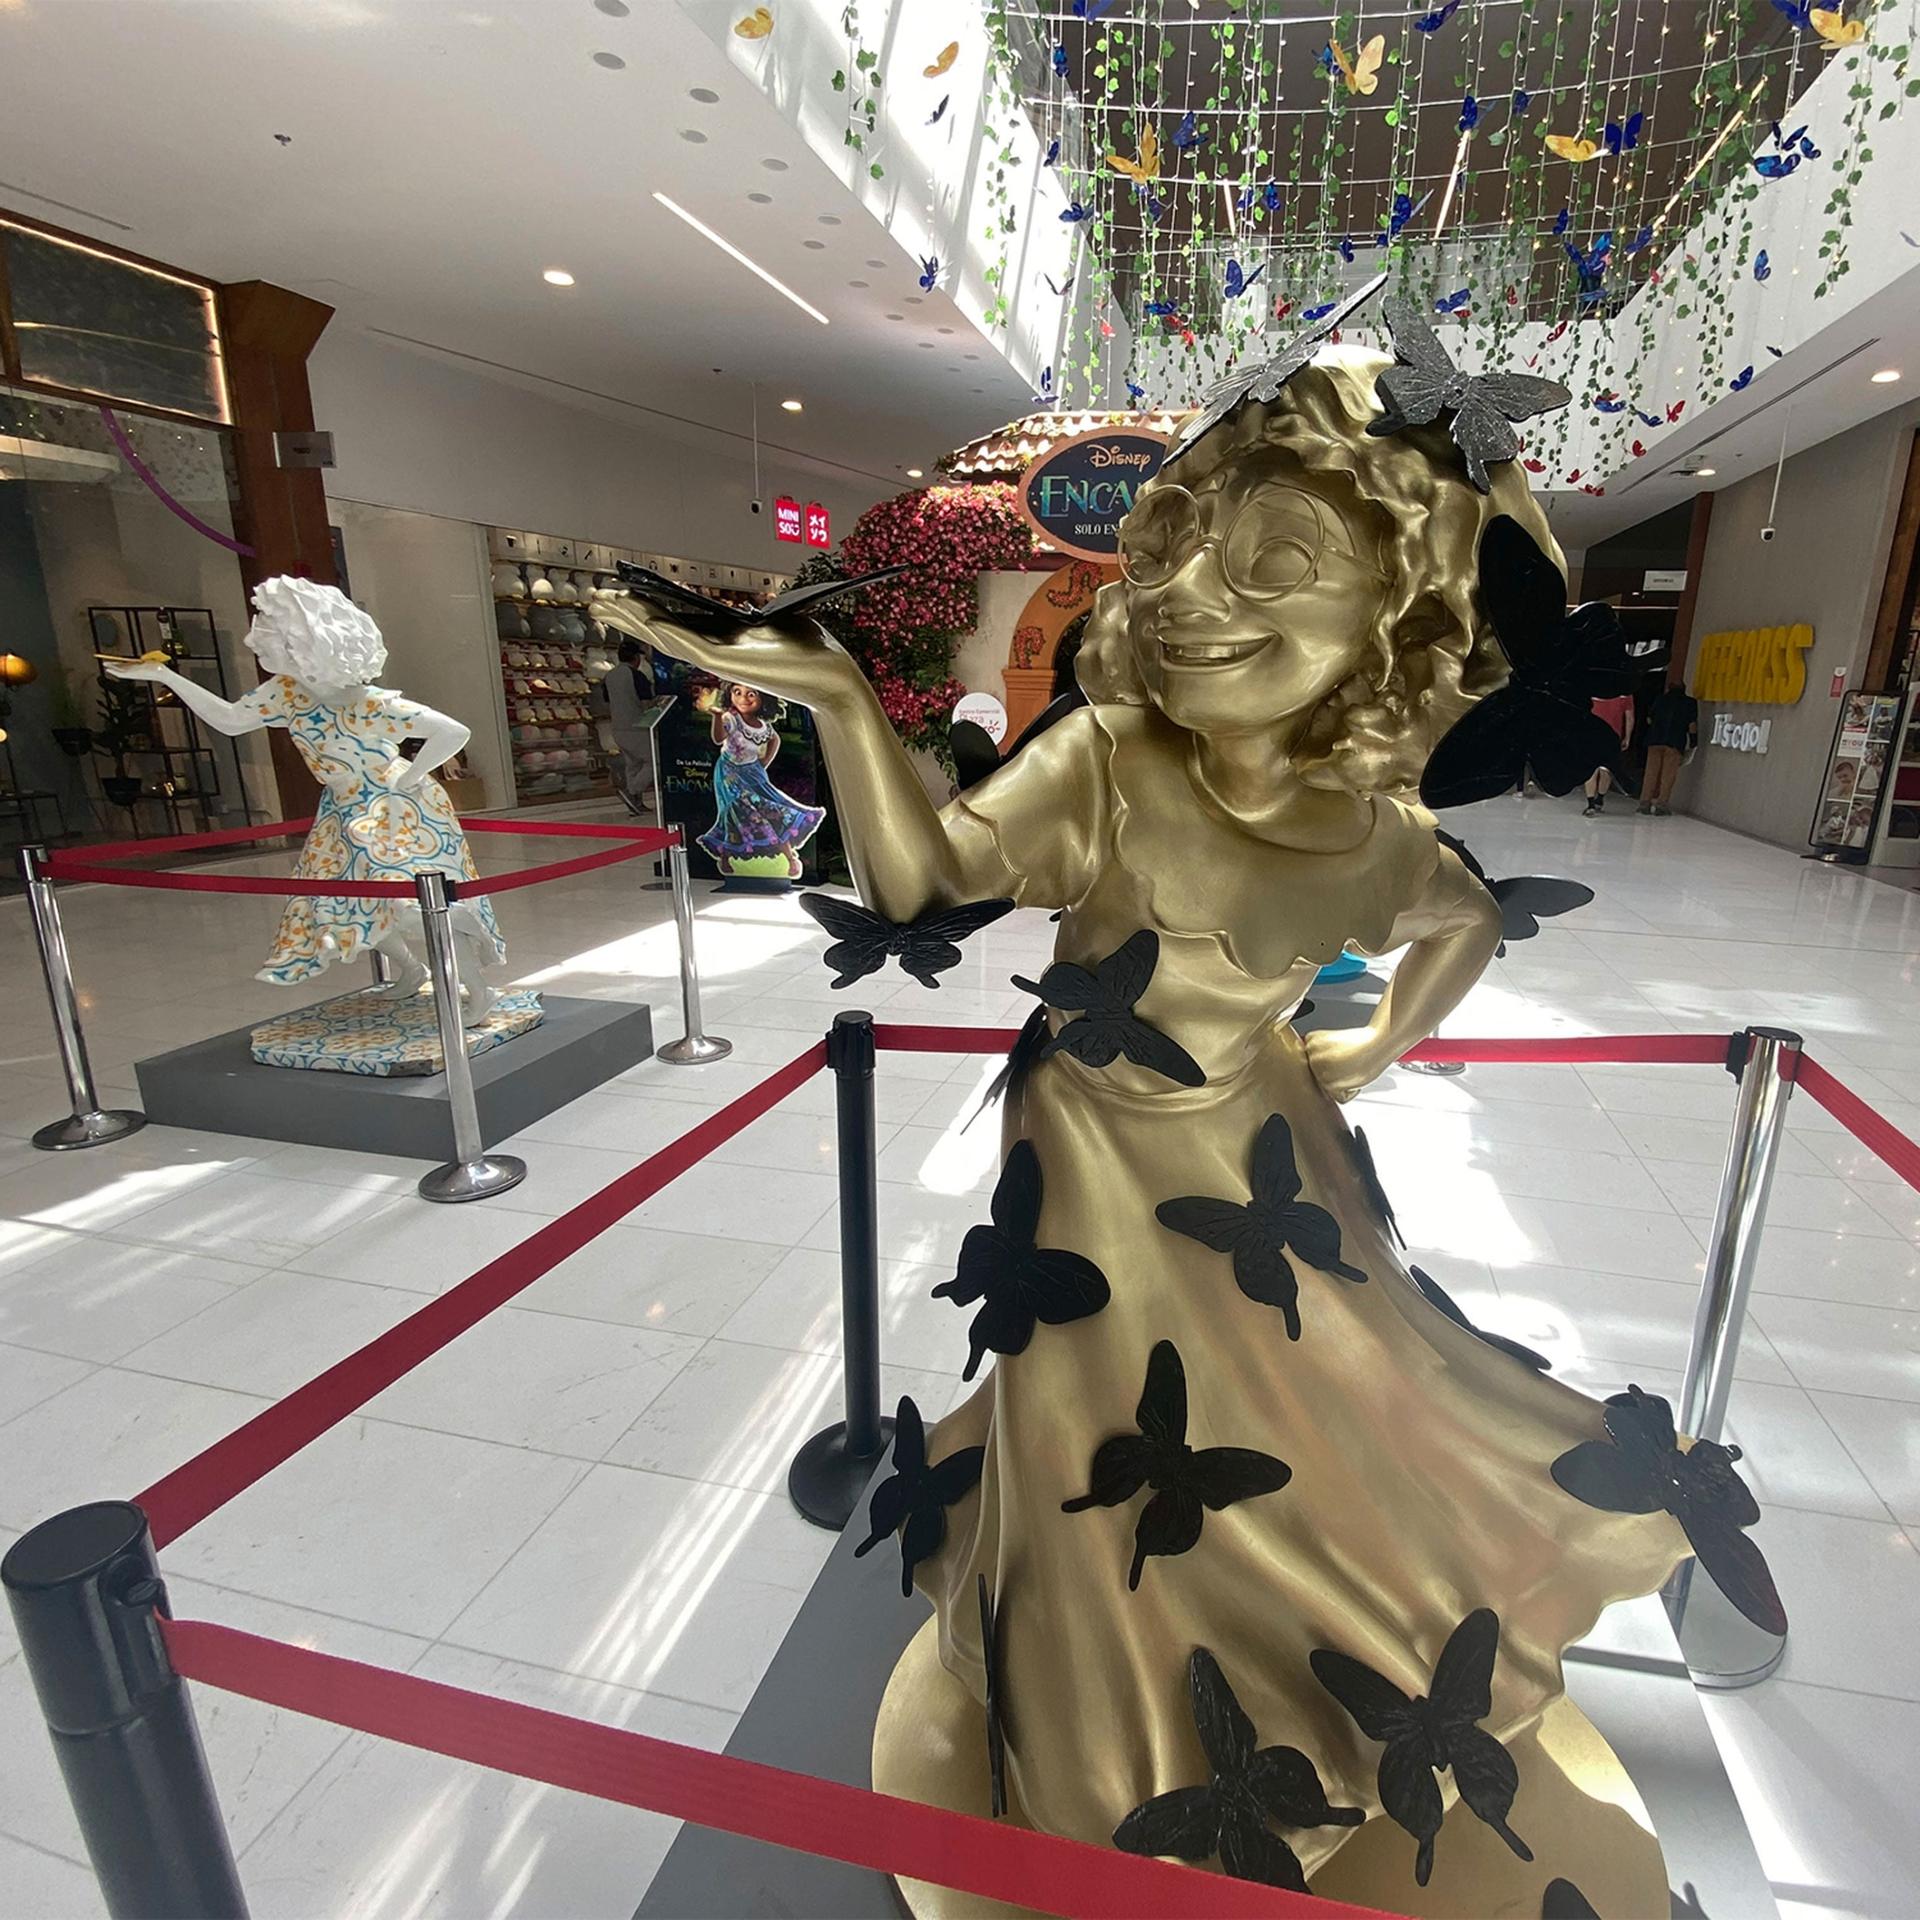 Plaster statues of Mirabel, the main character in “Encanto," stand at the entrance to a shopping mall in Bogotá, Colombia.